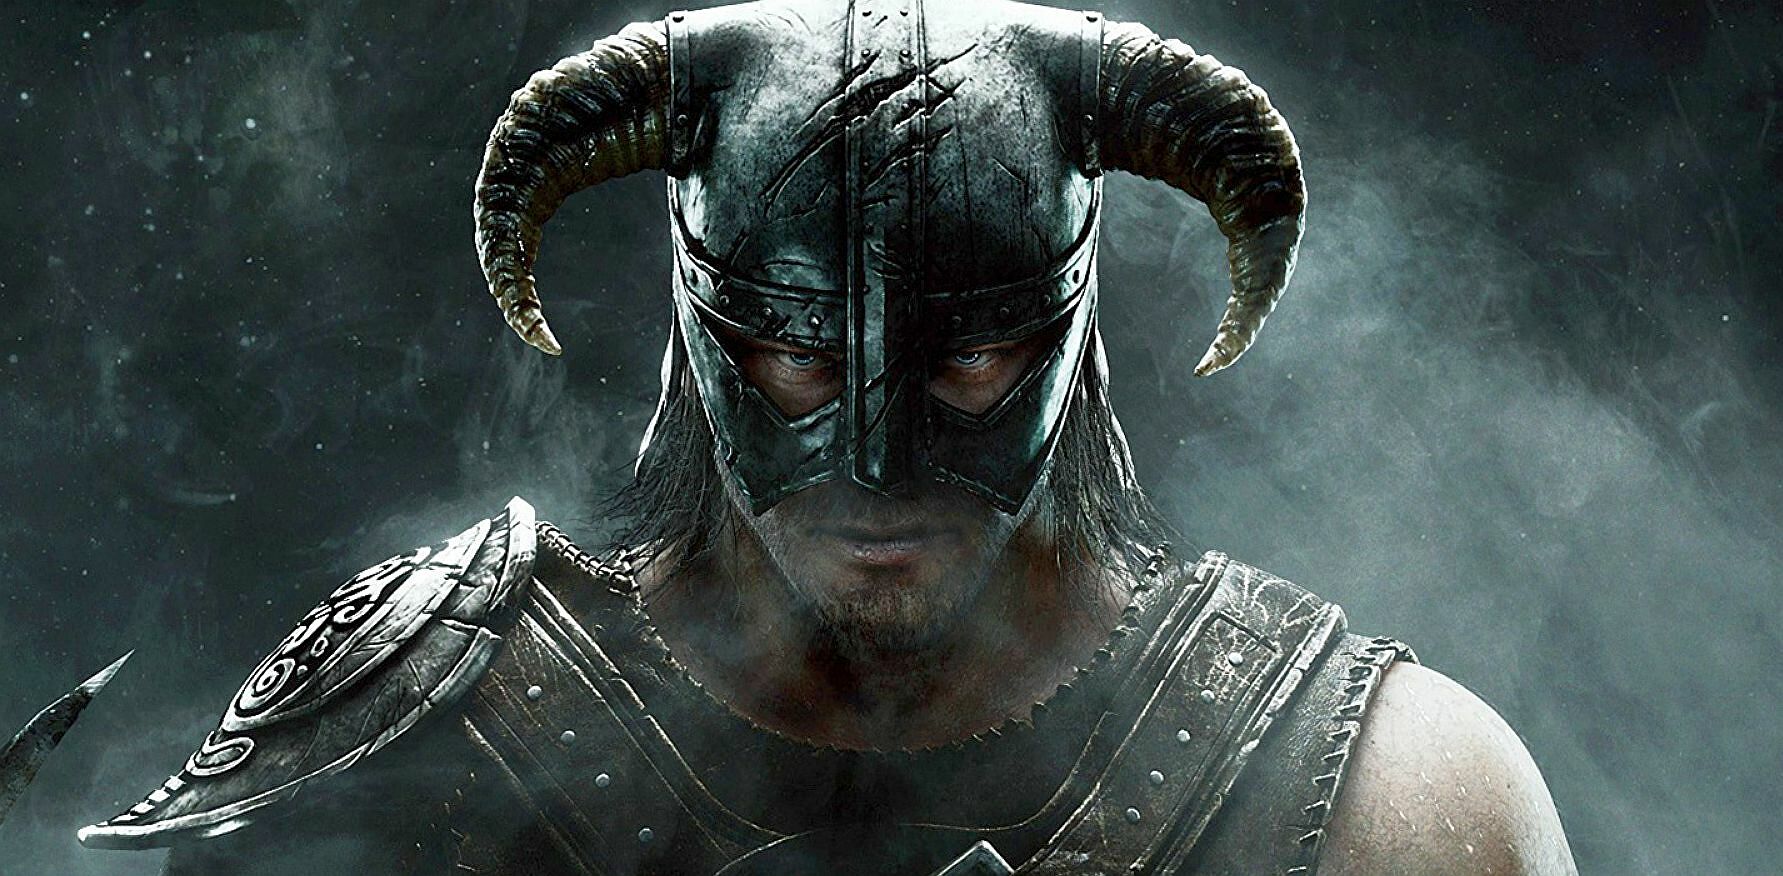 Skyrim modders are working to bring DLSS, FSR2, and XeSS upscaling to the game